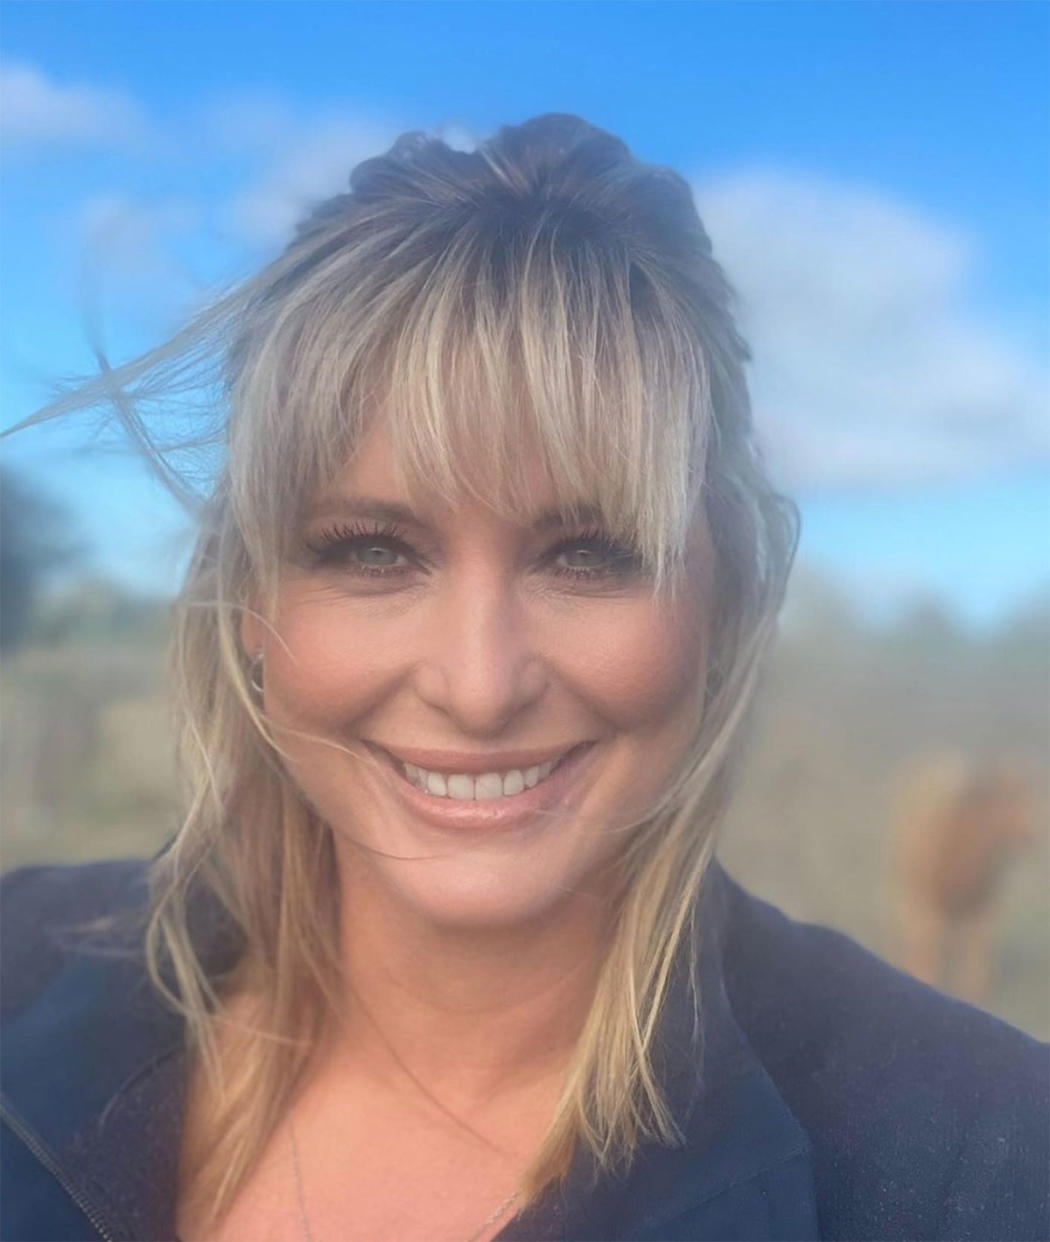 Johanna Griggs with a fringe and makeup